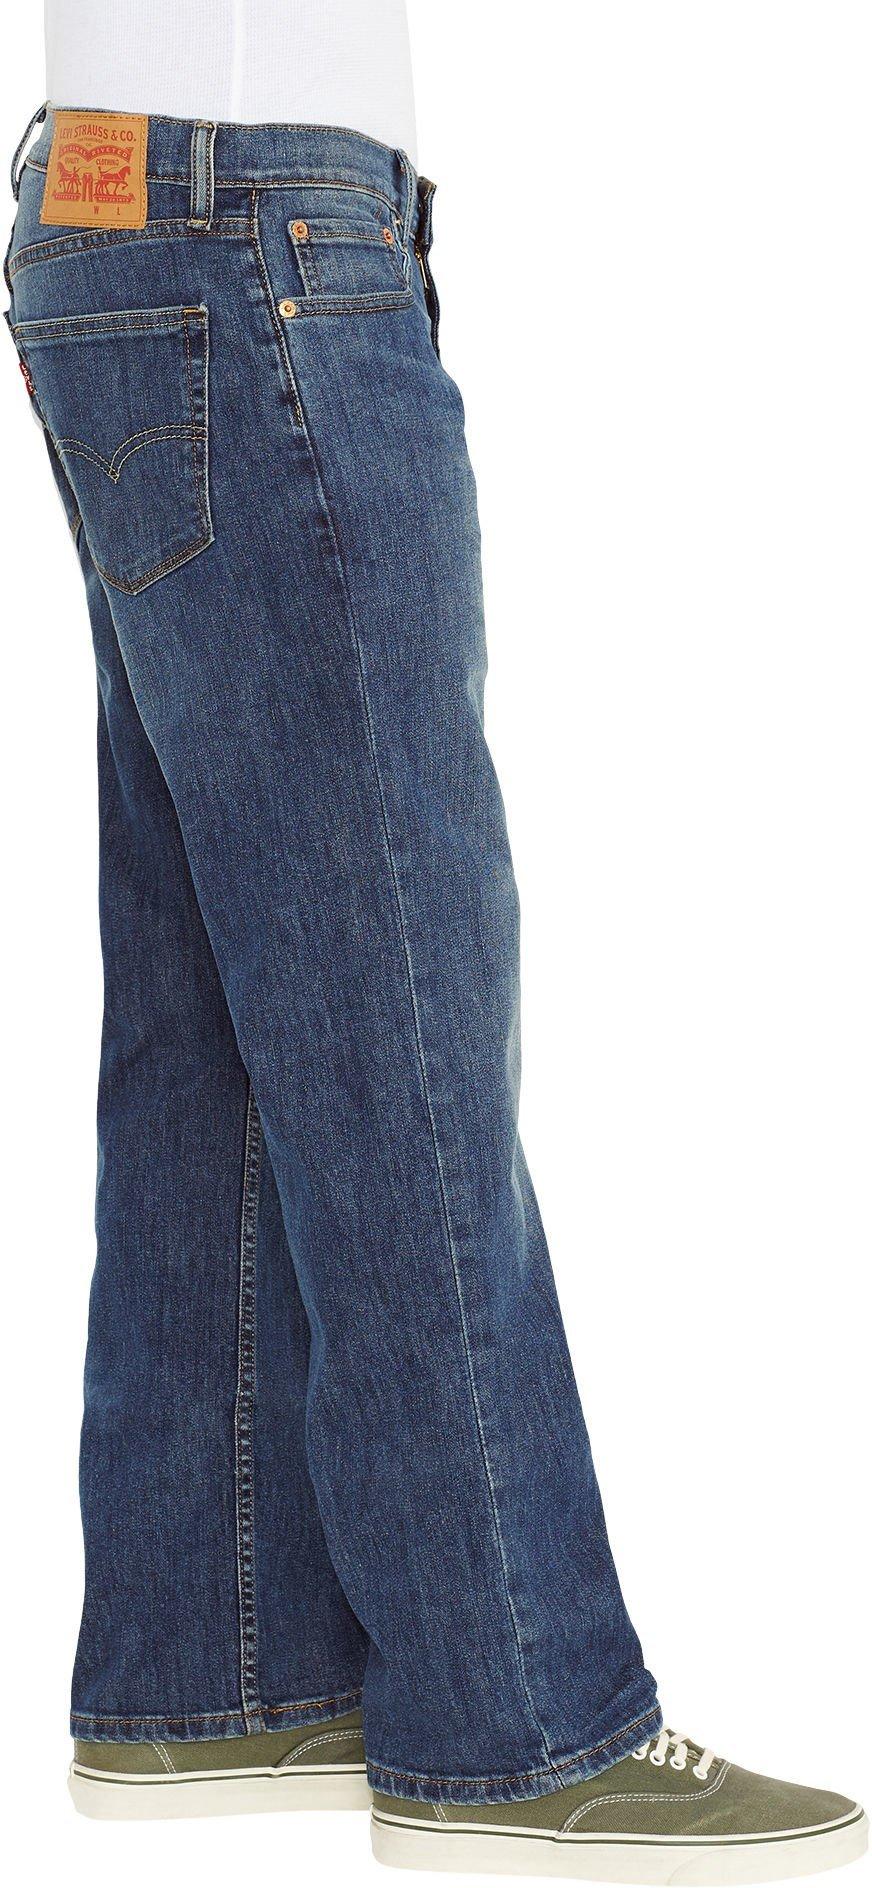 levis 559 steely blue